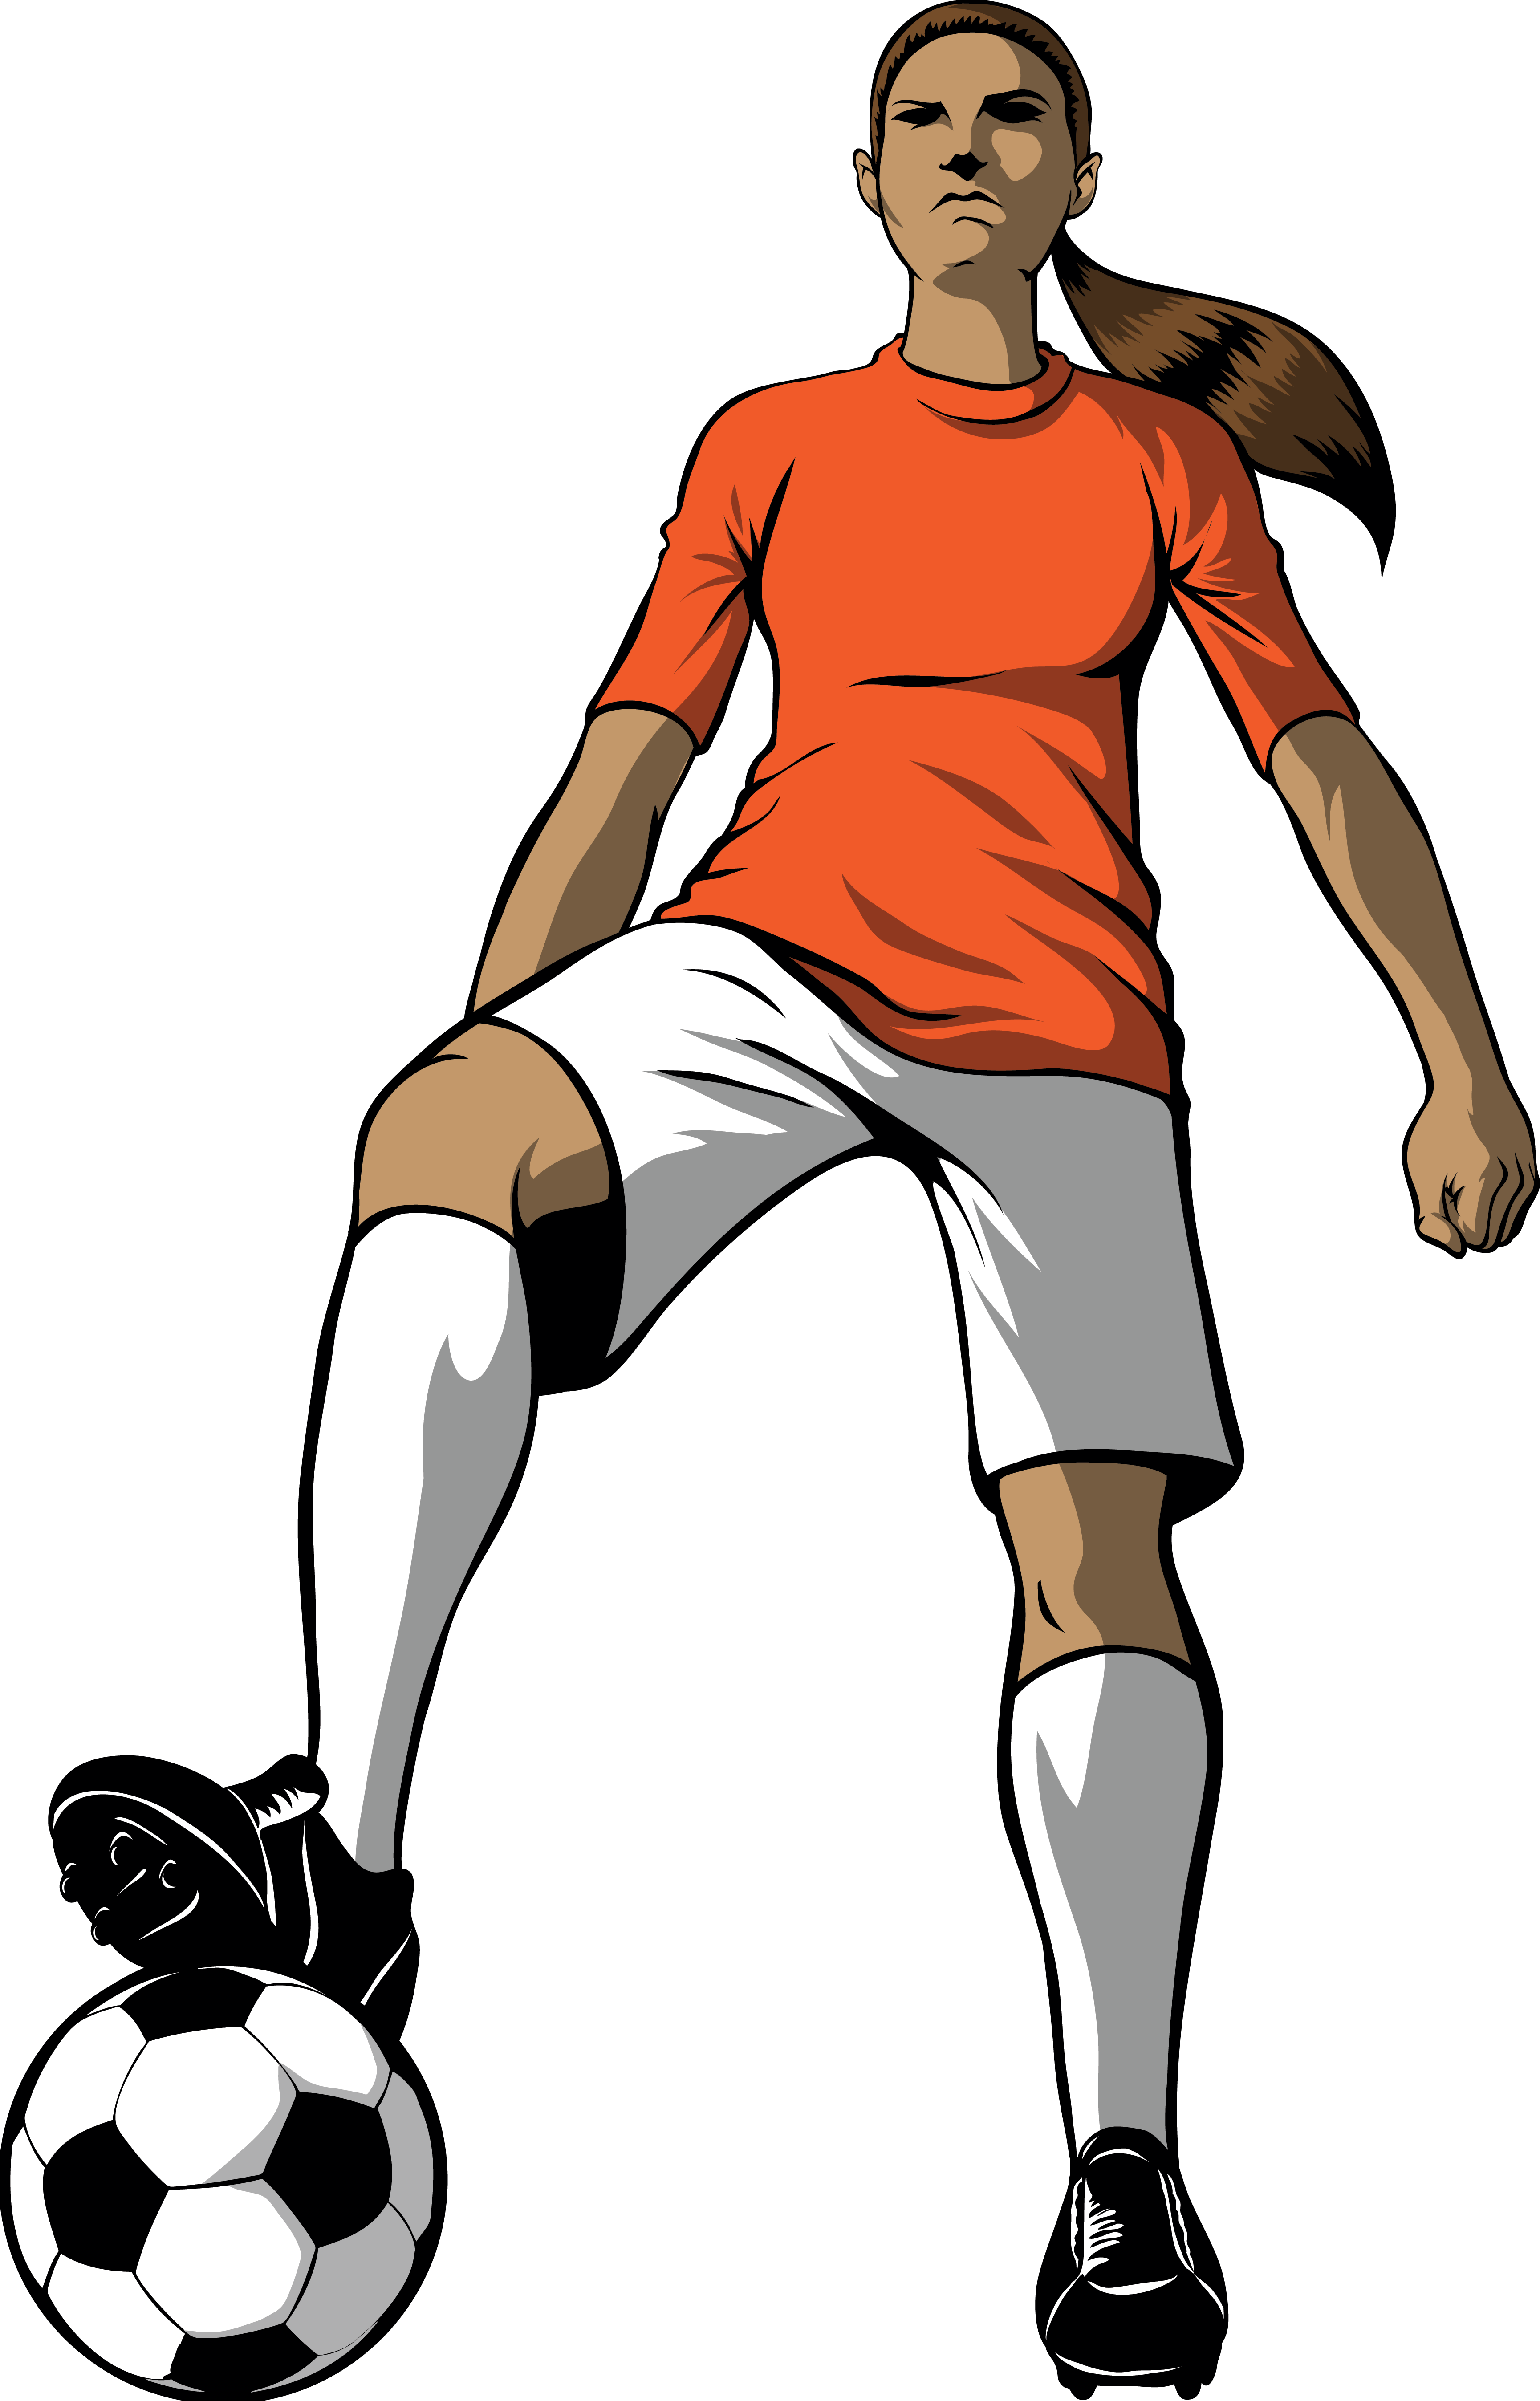 Girl playing soccer and basketball clipart